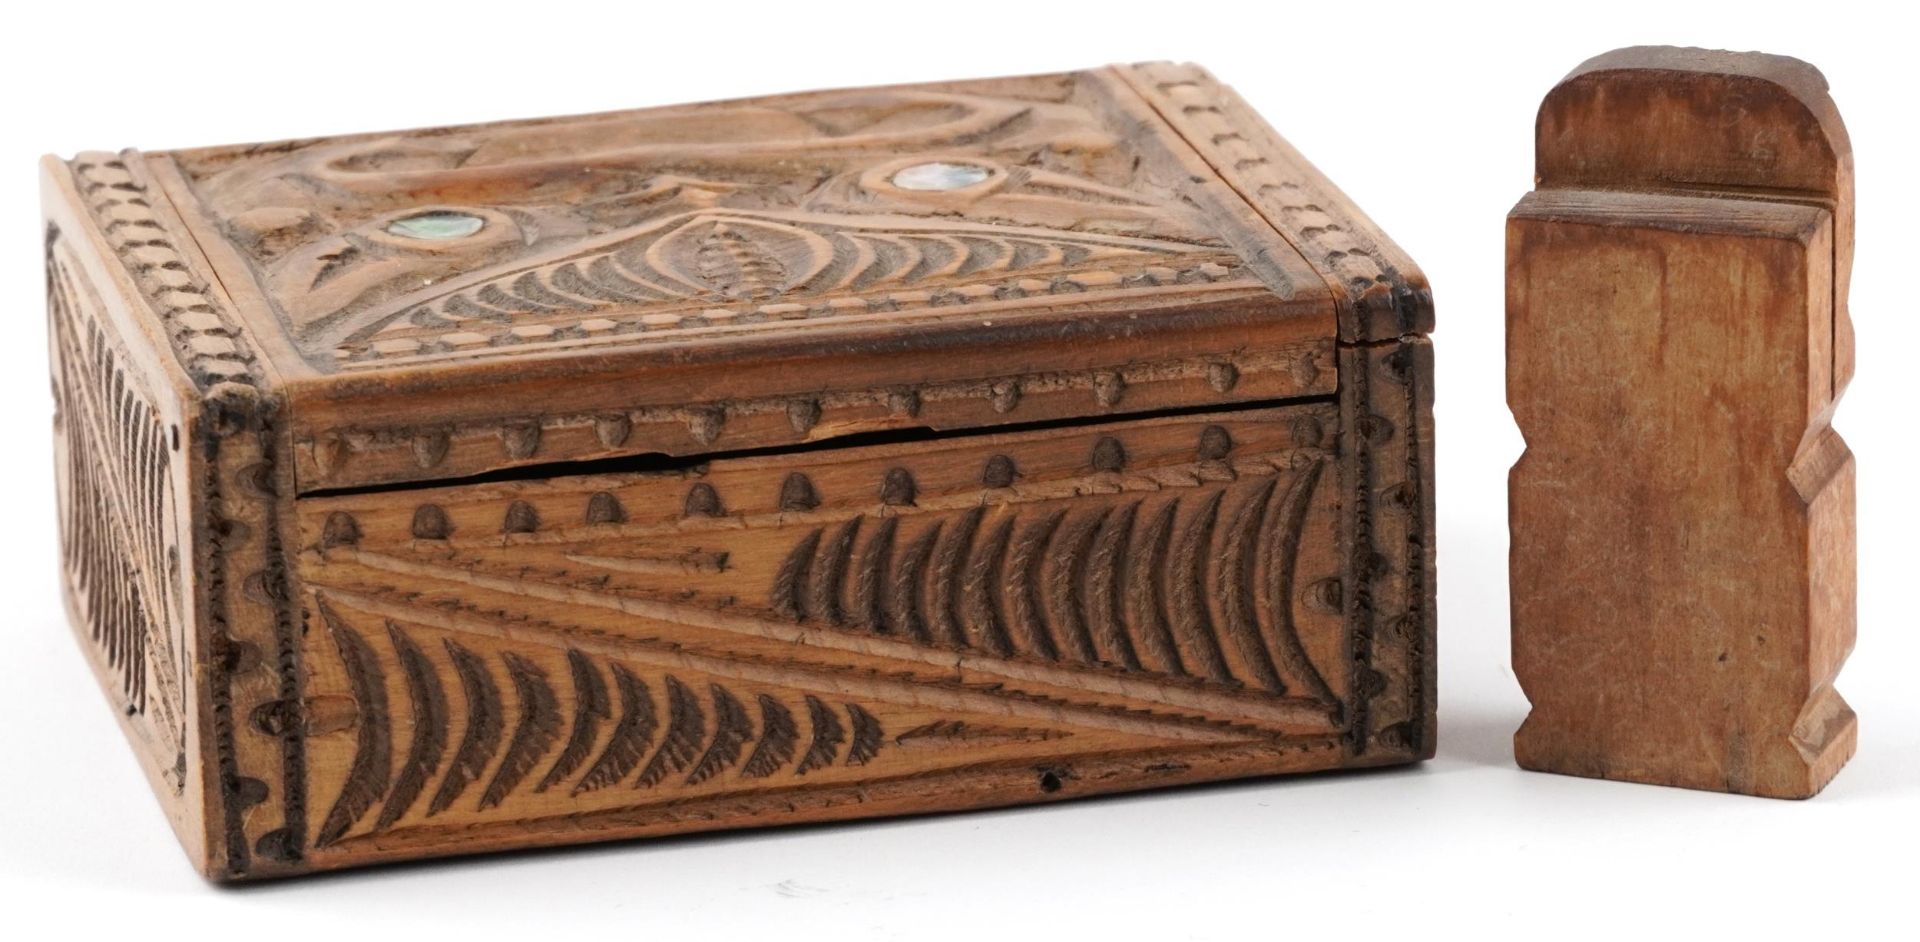 New Zealand Maori carvings including a rectangular box with hinged lid and abalone inlay, the - Image 2 of 3